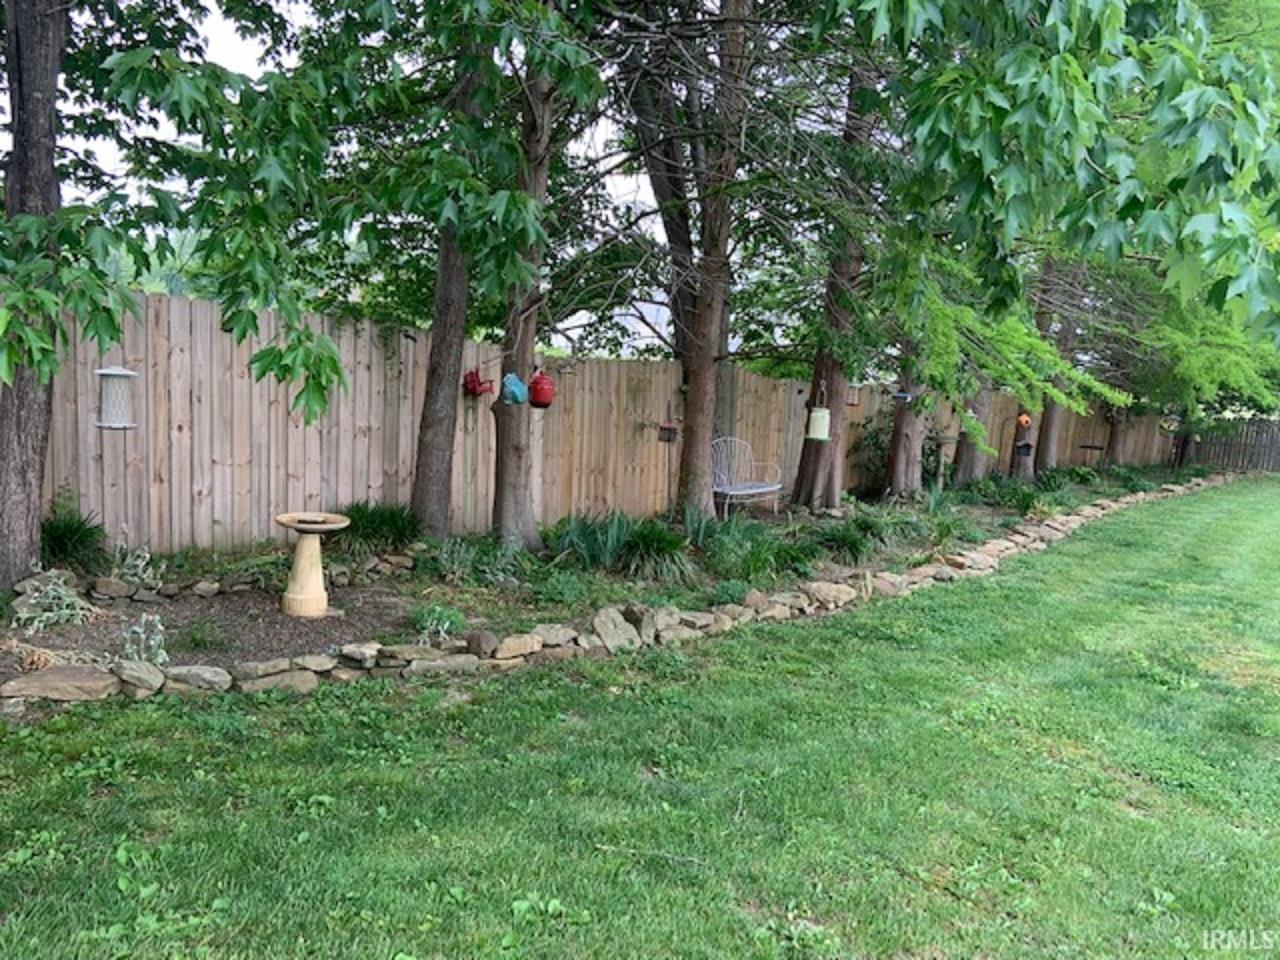 Privacy fence and landscaping